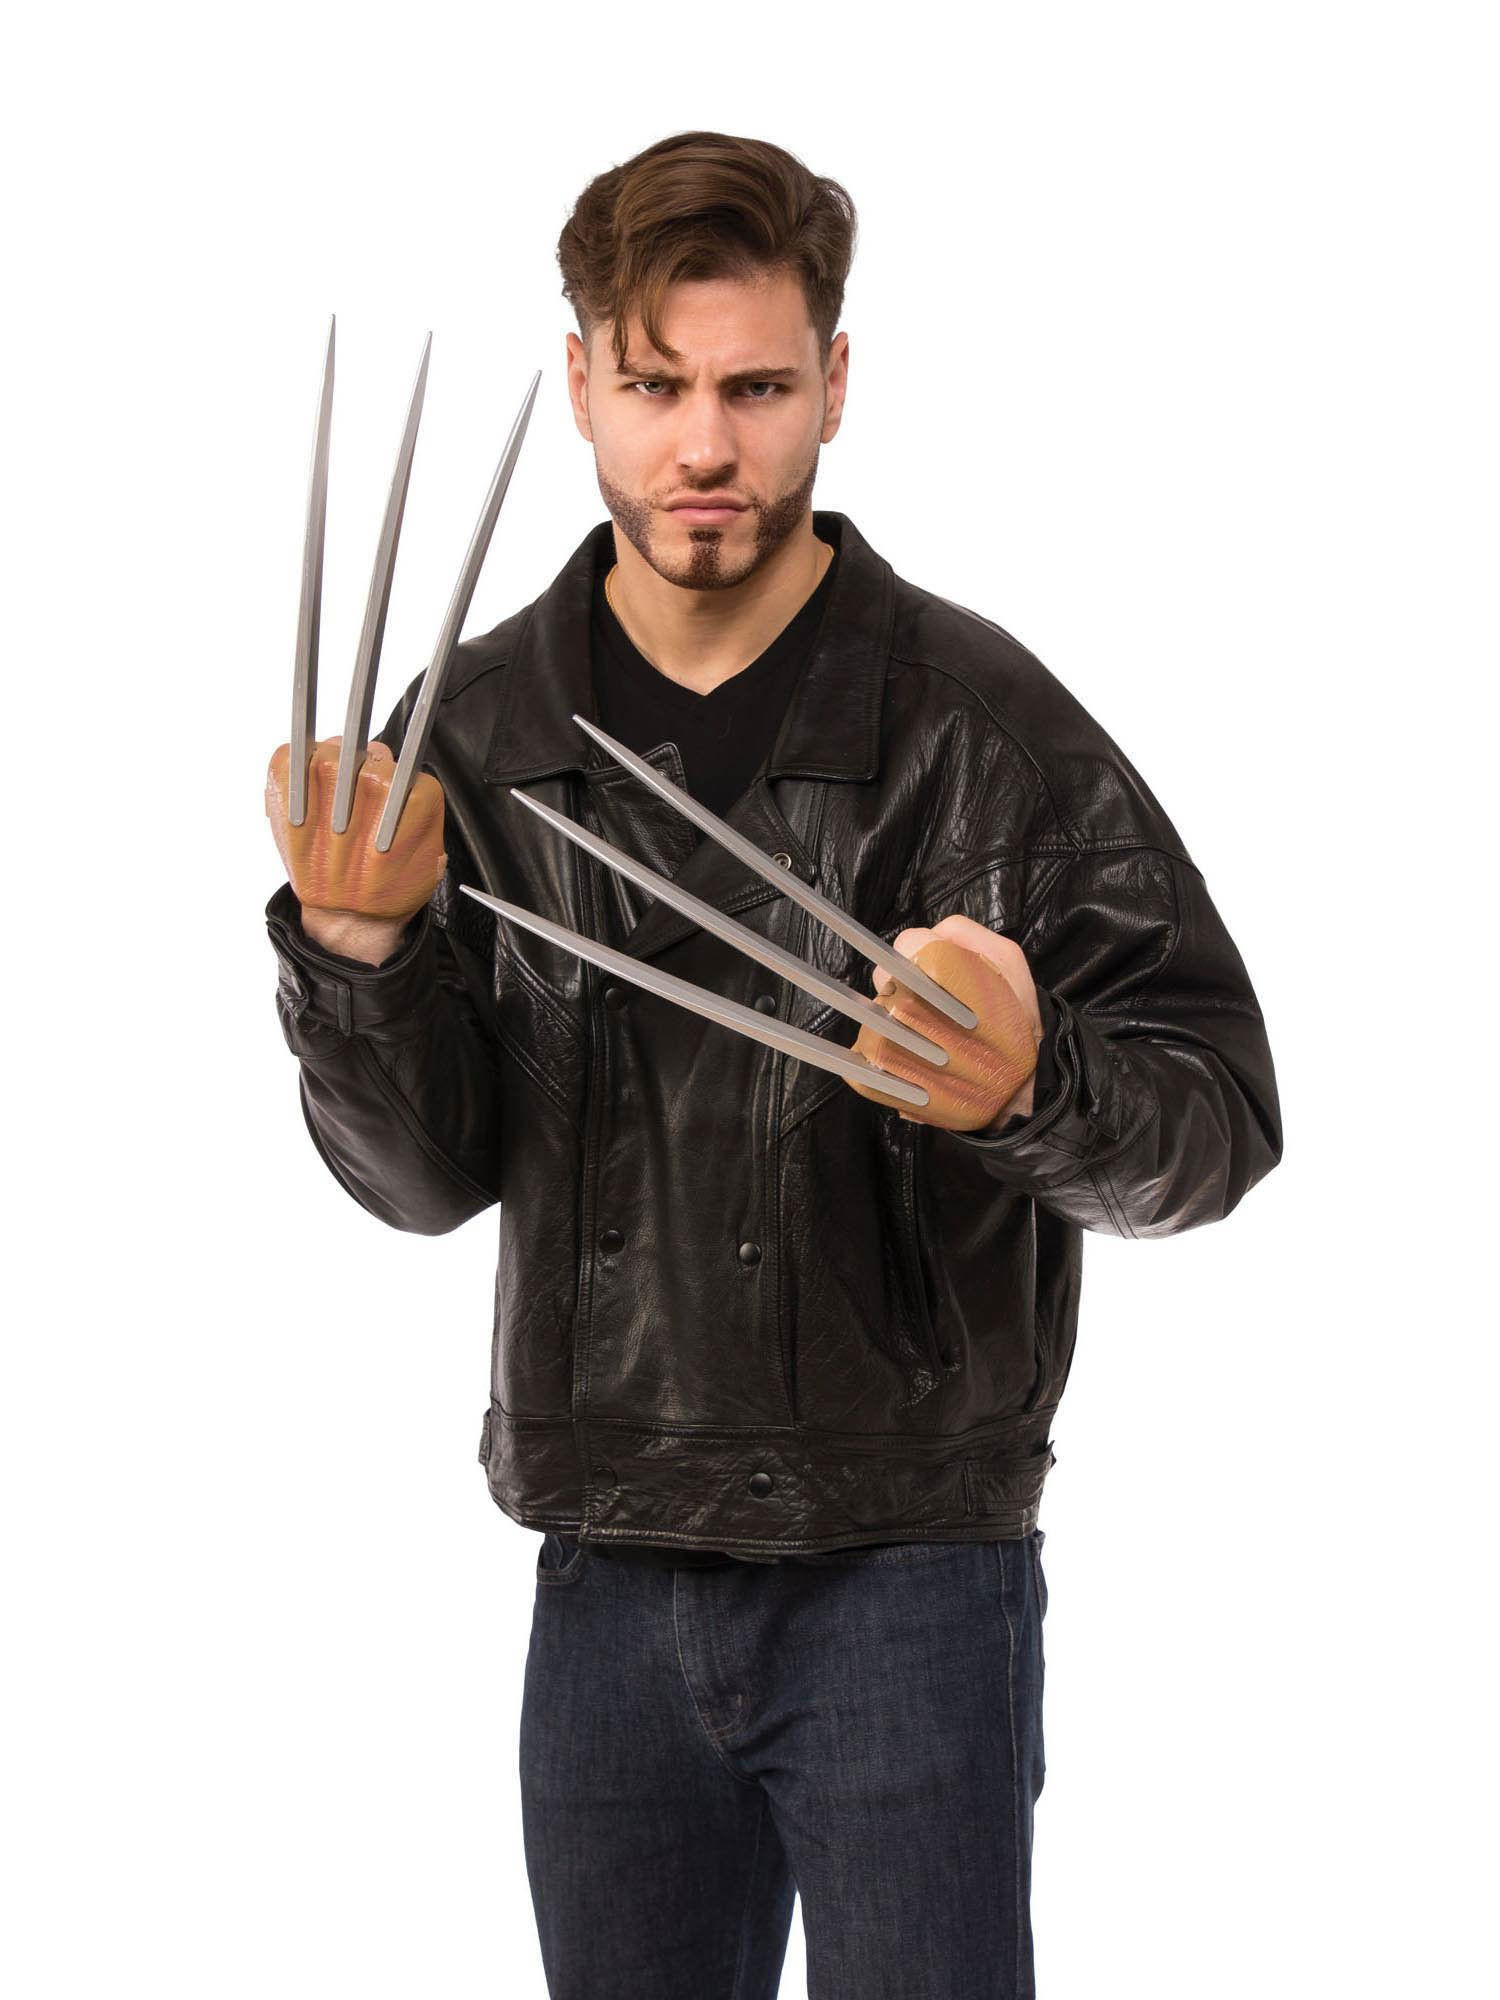 Male Halloween Costume Ideas 2020
 Adult Wolverine Xmen Claws Adult Costumes for 2019